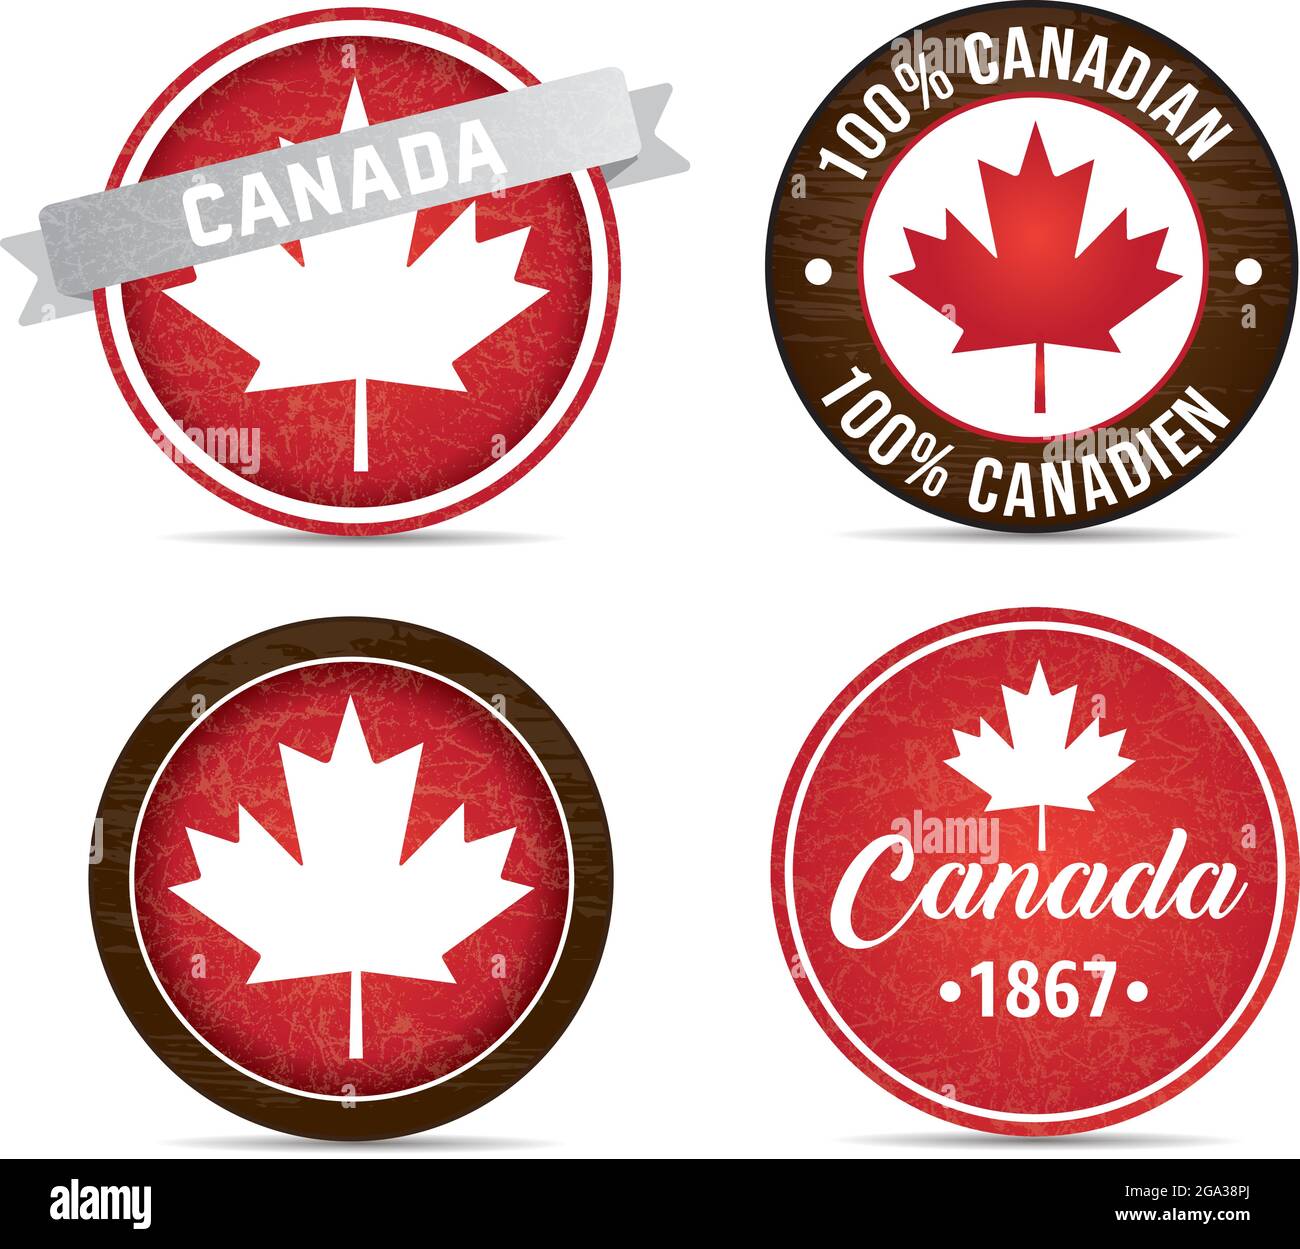 Canada country emblem round icon set vector with grunge and wood texture Stock Vector